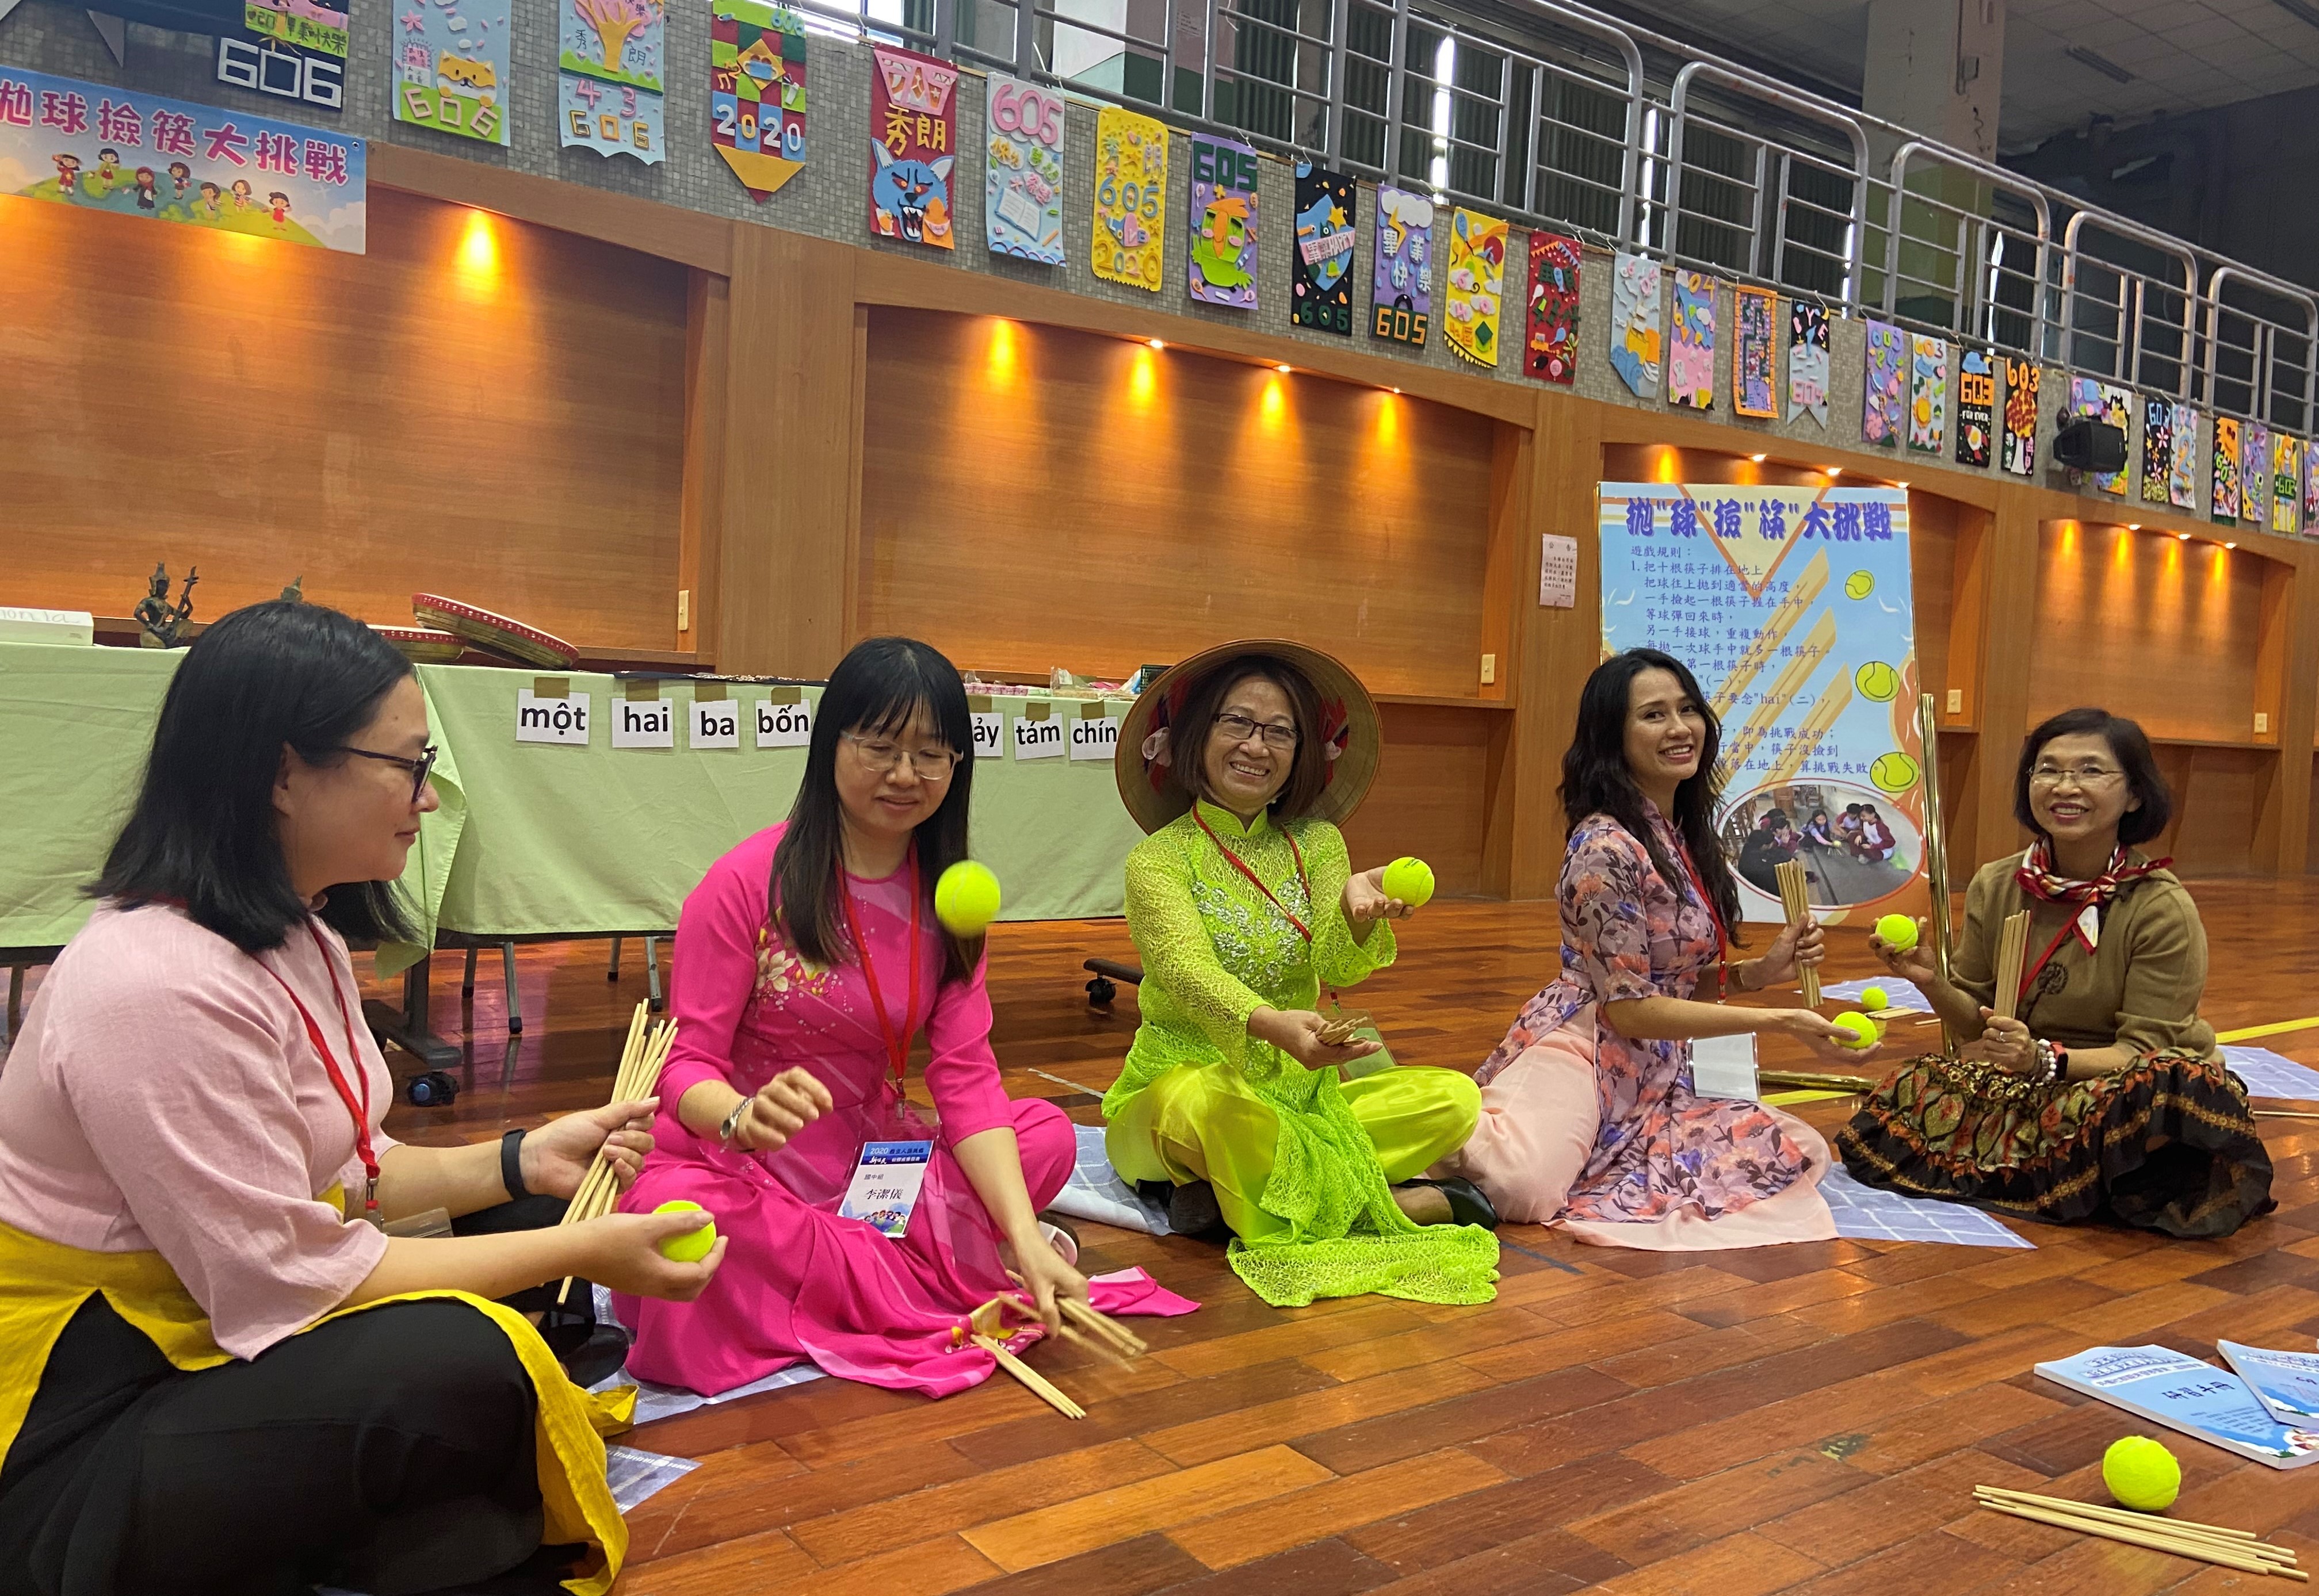 The New Taipei City Government handles multicultural education activities. Photo/Provided by New Taipei City Government